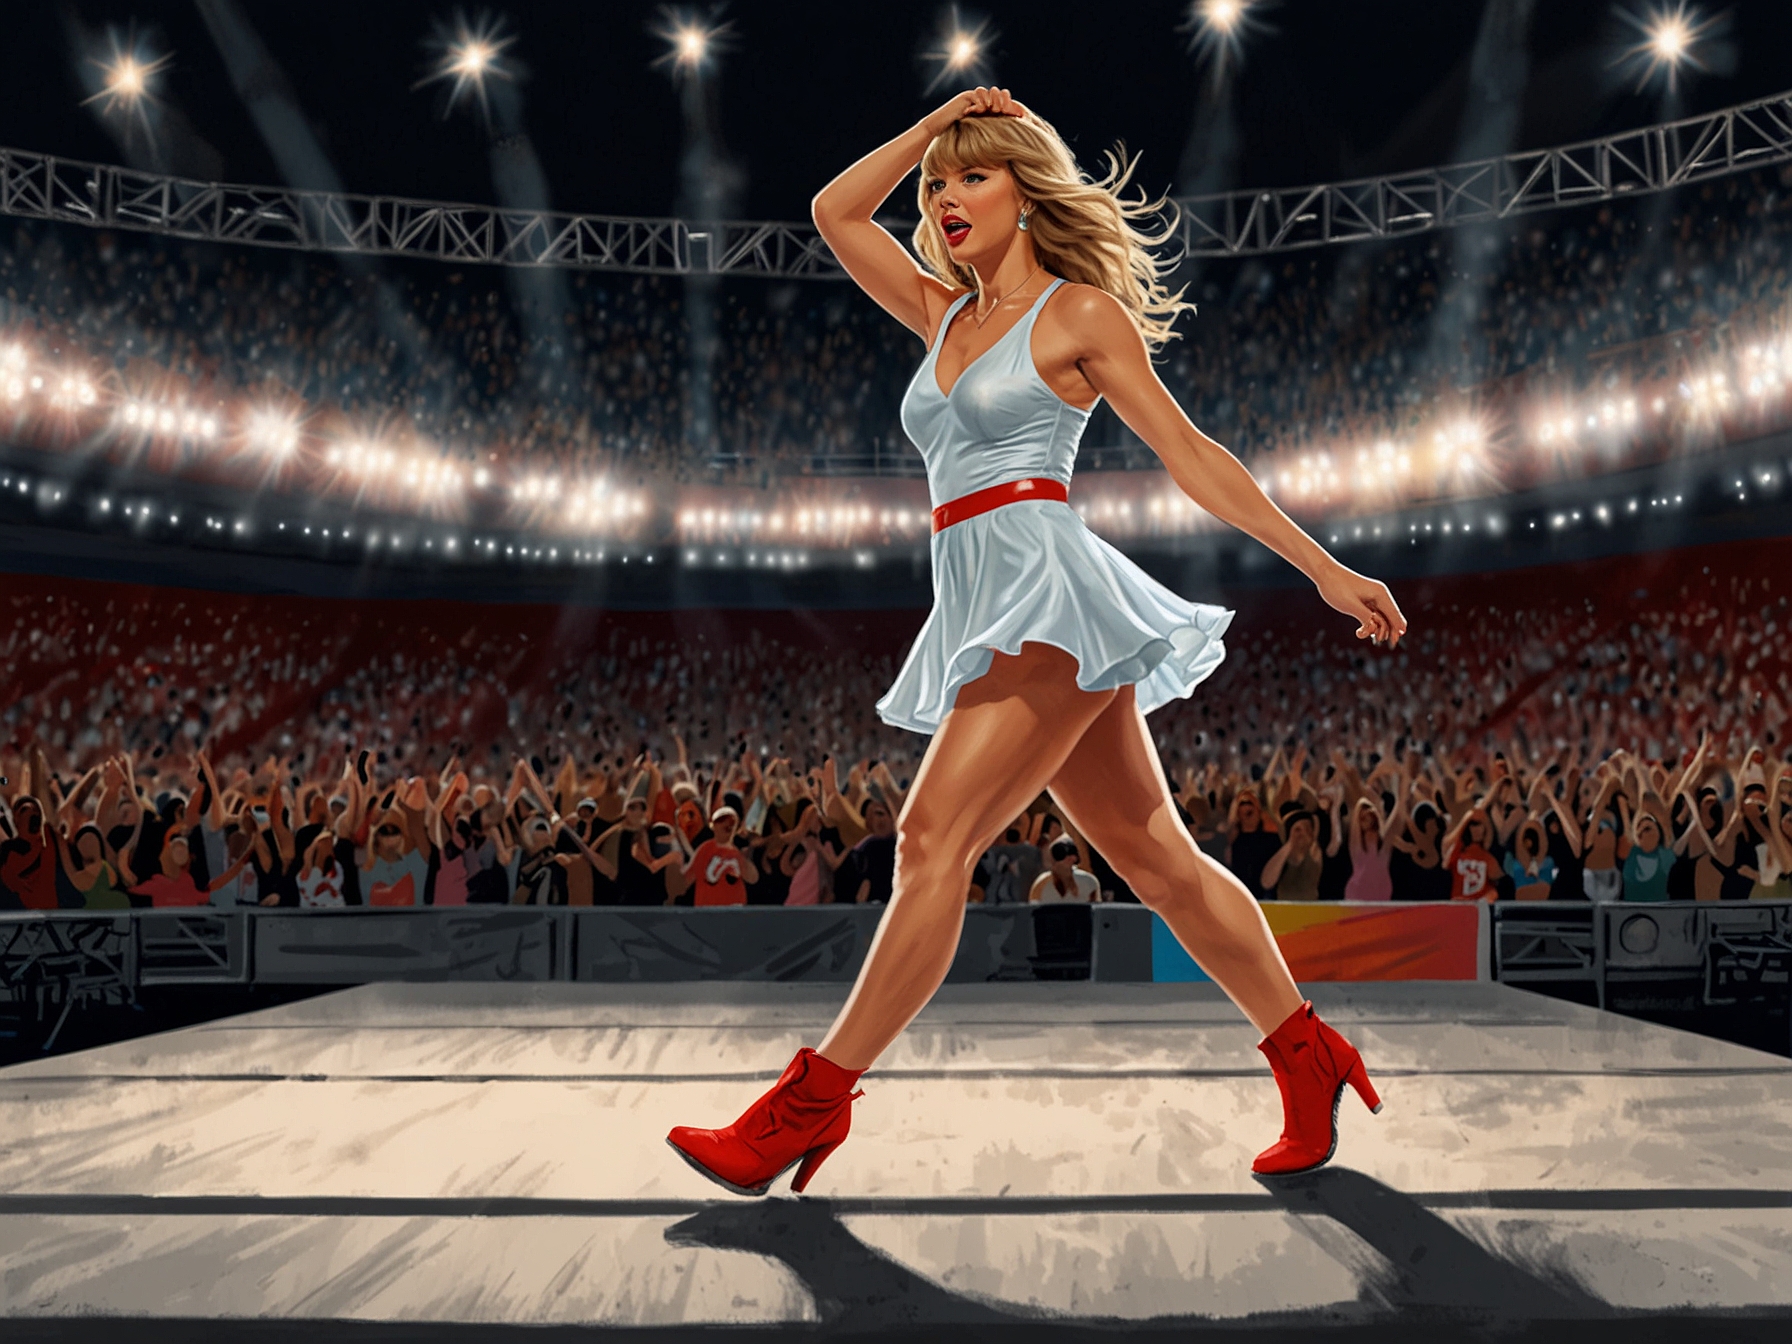 A view of the concert stage set up with bleachers, as Taylor Swift delightfully recreates NFL star Travis Kelce’s entrance, blending her musical performance with personal affection.